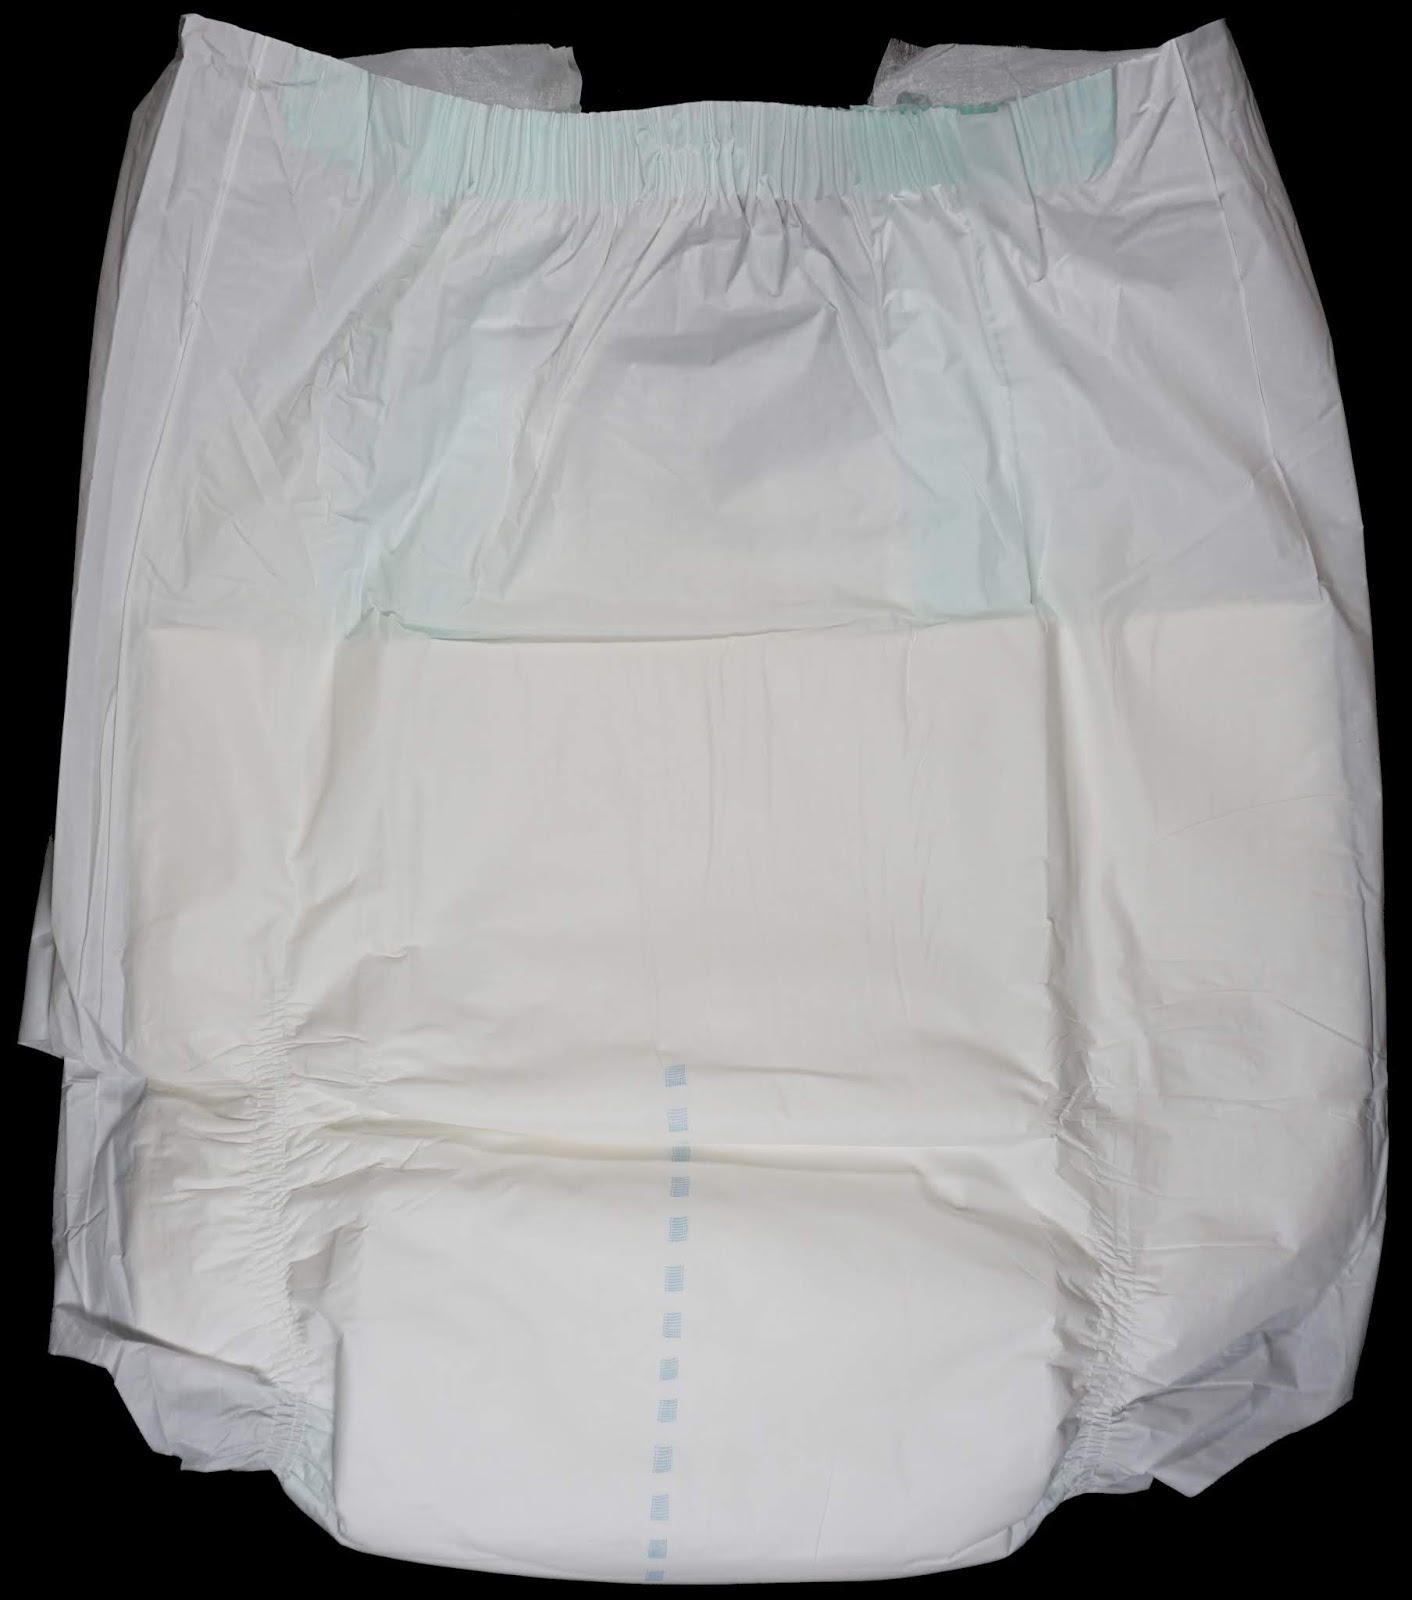 Diaper Metrics: Depend Protection with Tabs (S/M) Adult Diaper Review